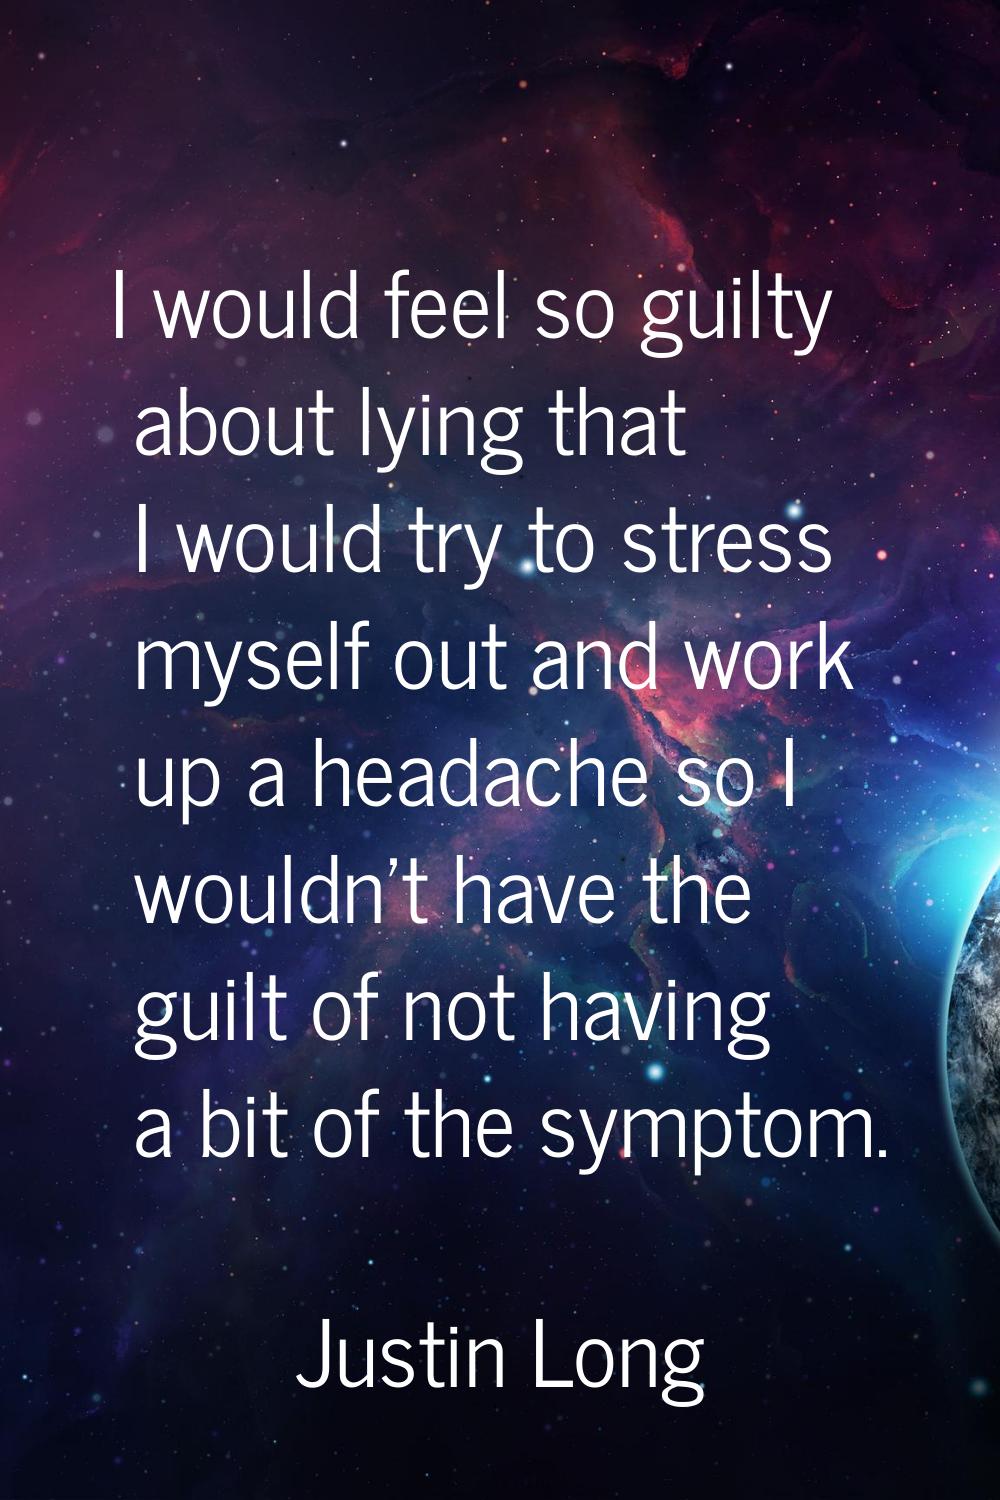 I would feel so guilty about lying that I would try to stress myself out and work up a headache so 